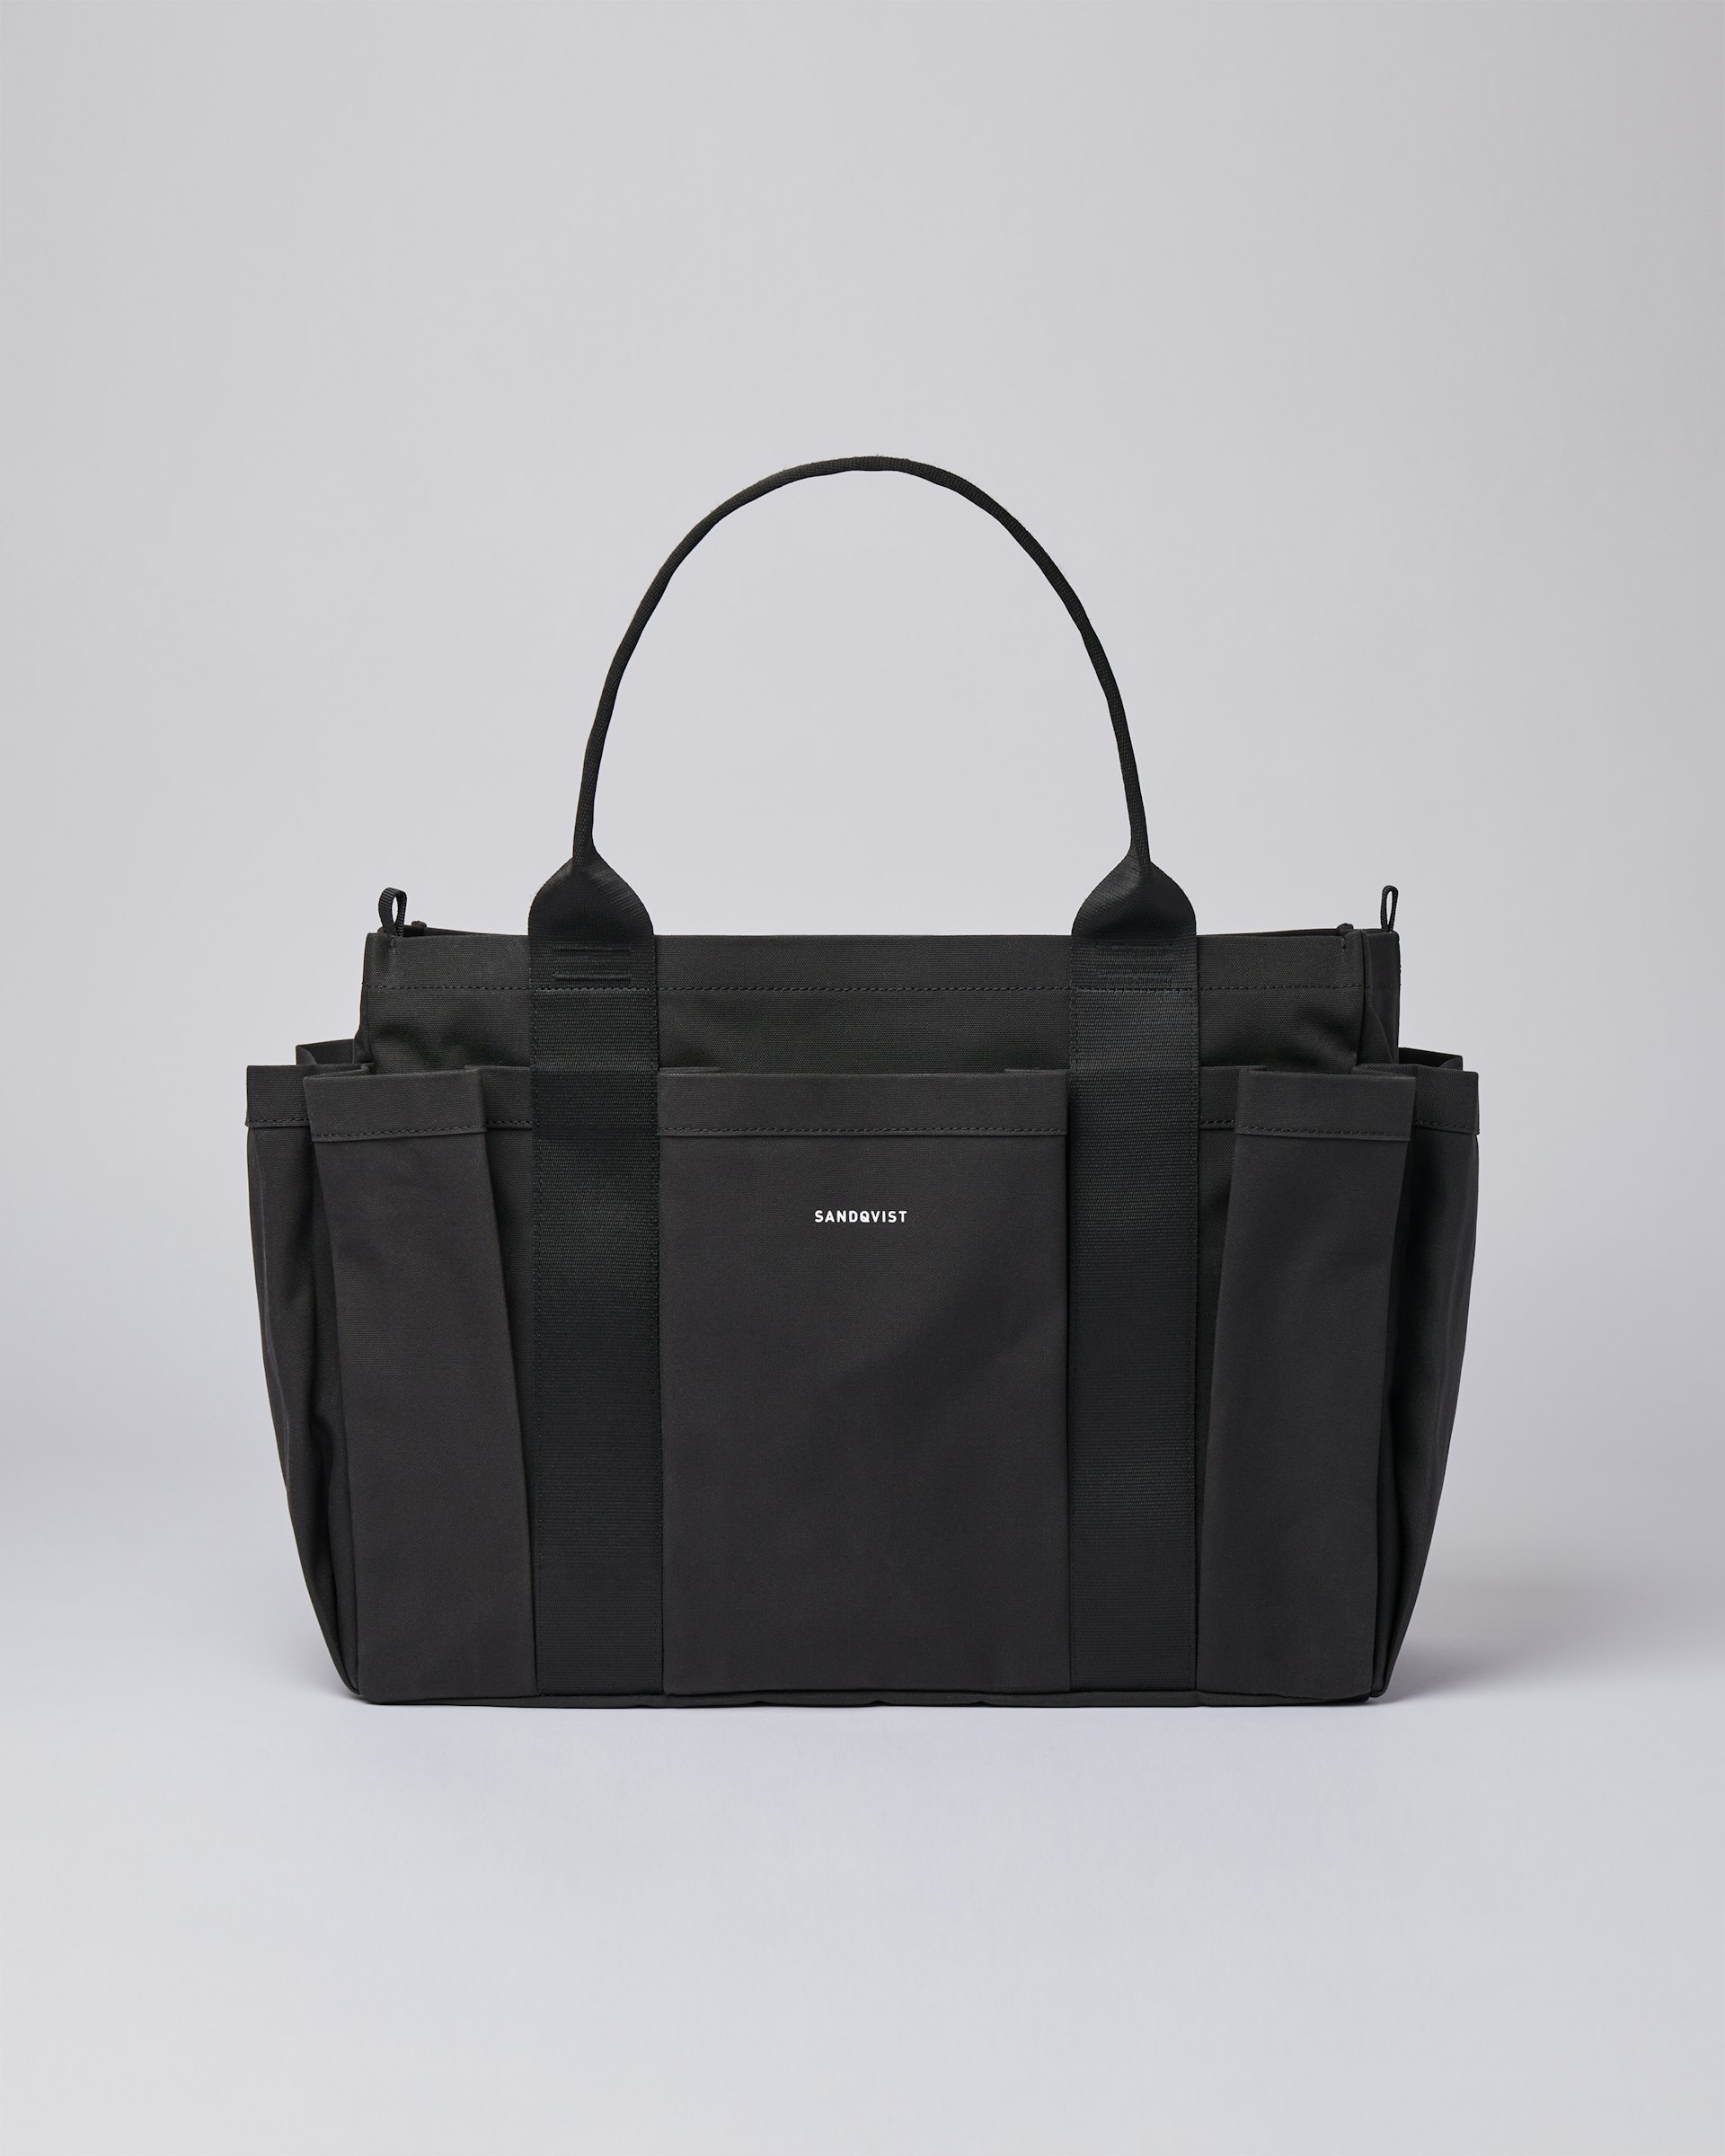 Garden Bag belongs to the category Collaborations